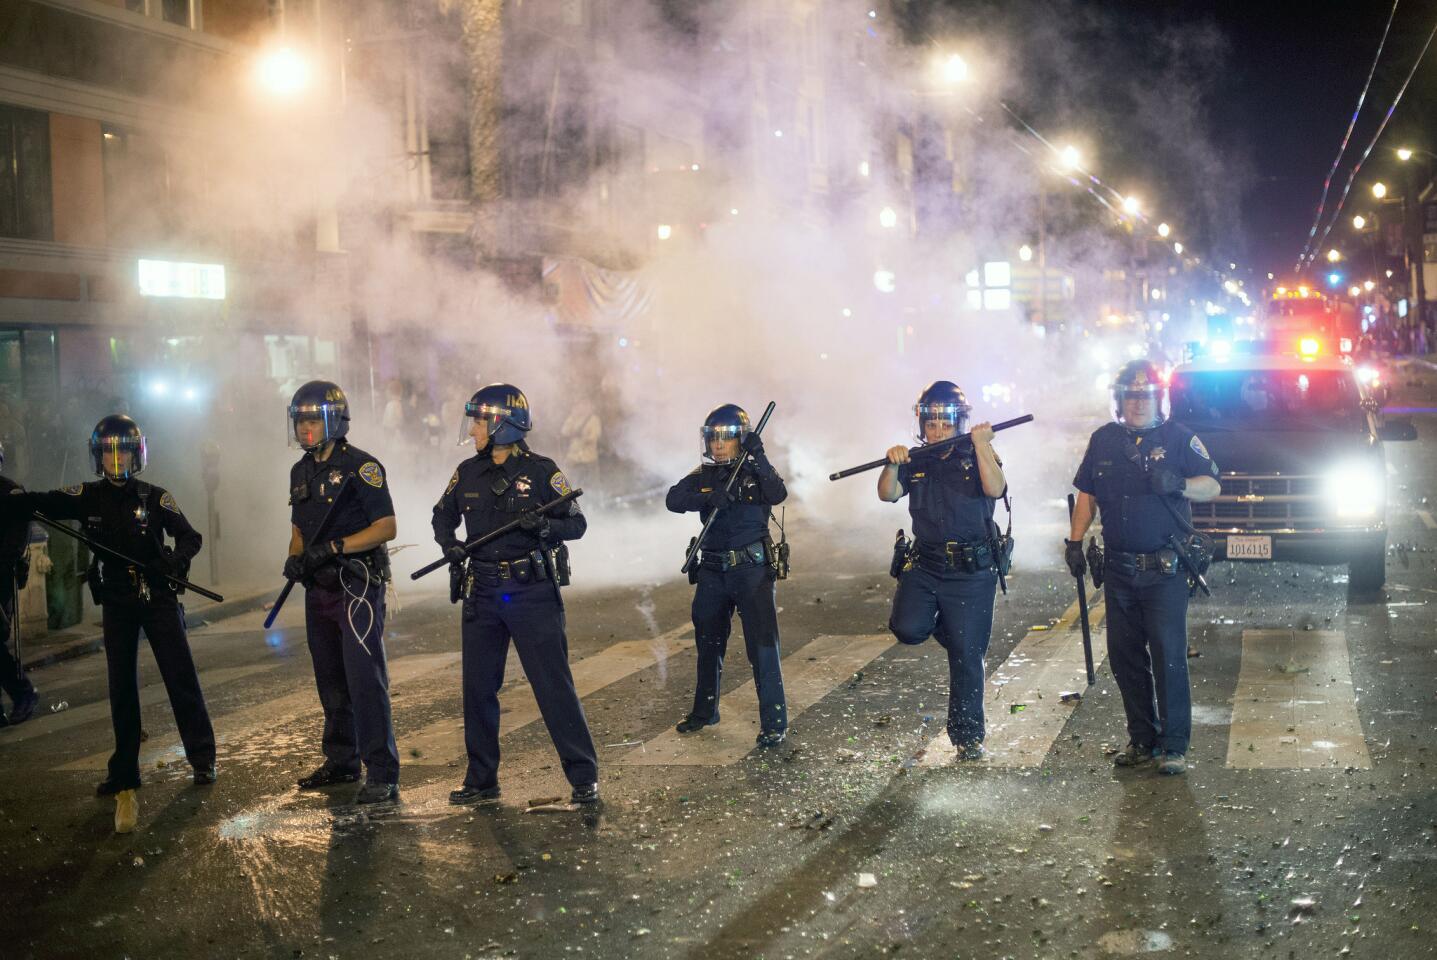 Violence erupts in San Francisco after 2014 World Series win